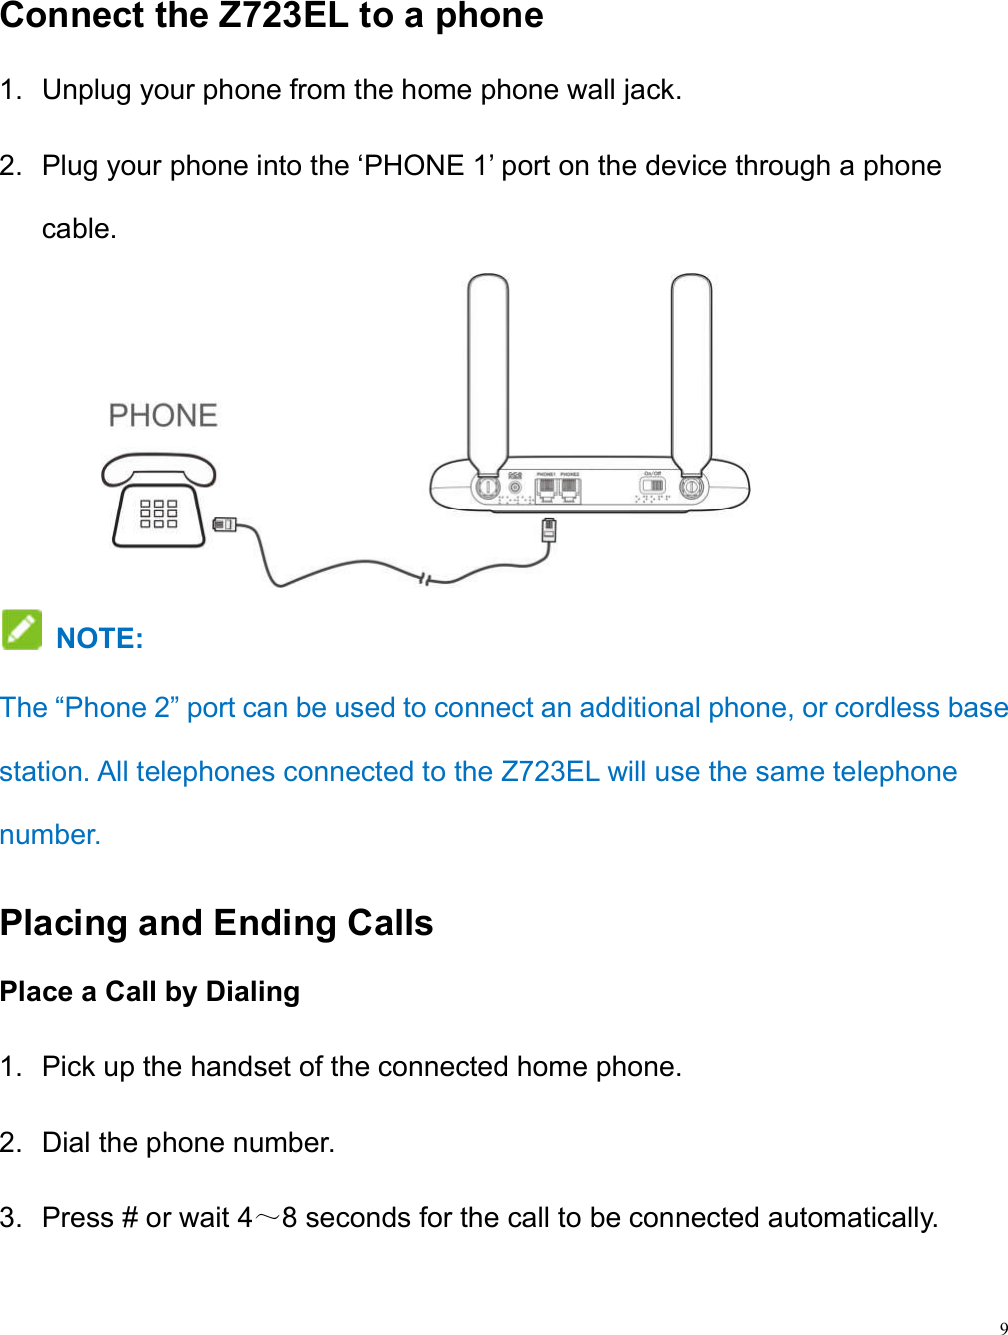 9  Connect the Z723EL to a phone 1.  Unplug your phone from the home phone wall jack. 2.  Plug your phone into the ‘PHONE 1’ port on the device through a phone cable.                 NOTE:   The “Phone 2” port can be used to connect an additional phone, or cordless base station. All telephones connected to the Z723EL will use the same telephone number. Placing and Ending Calls Place a Call by Dialing 1.  Pick up the handset of the connected home phone. 2.  Dial the phone number. 3.  Press # or wait 4～8 seconds for the call to be connected automatically.  